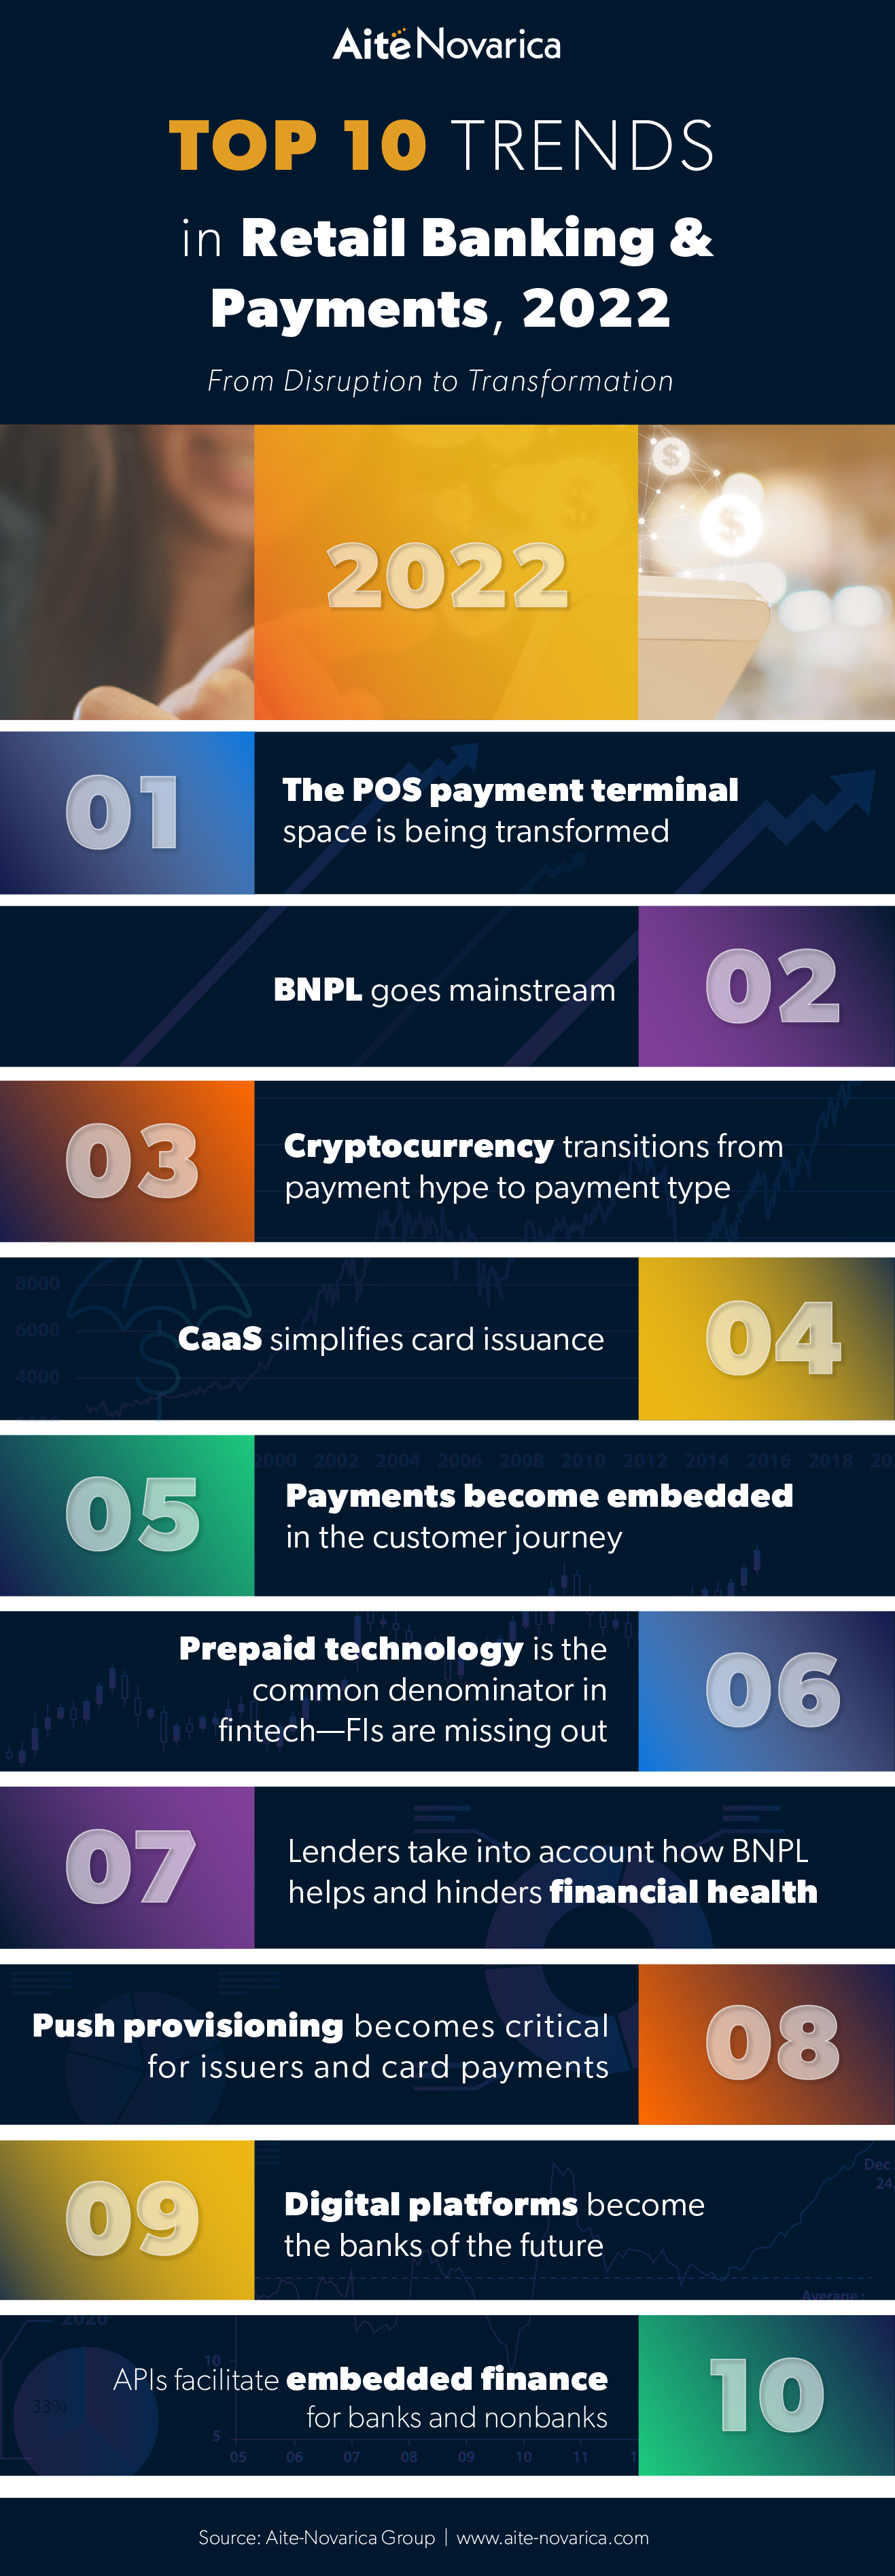 Top 10 Trends in Retail Banking & Payments, 2022 From Disruption to